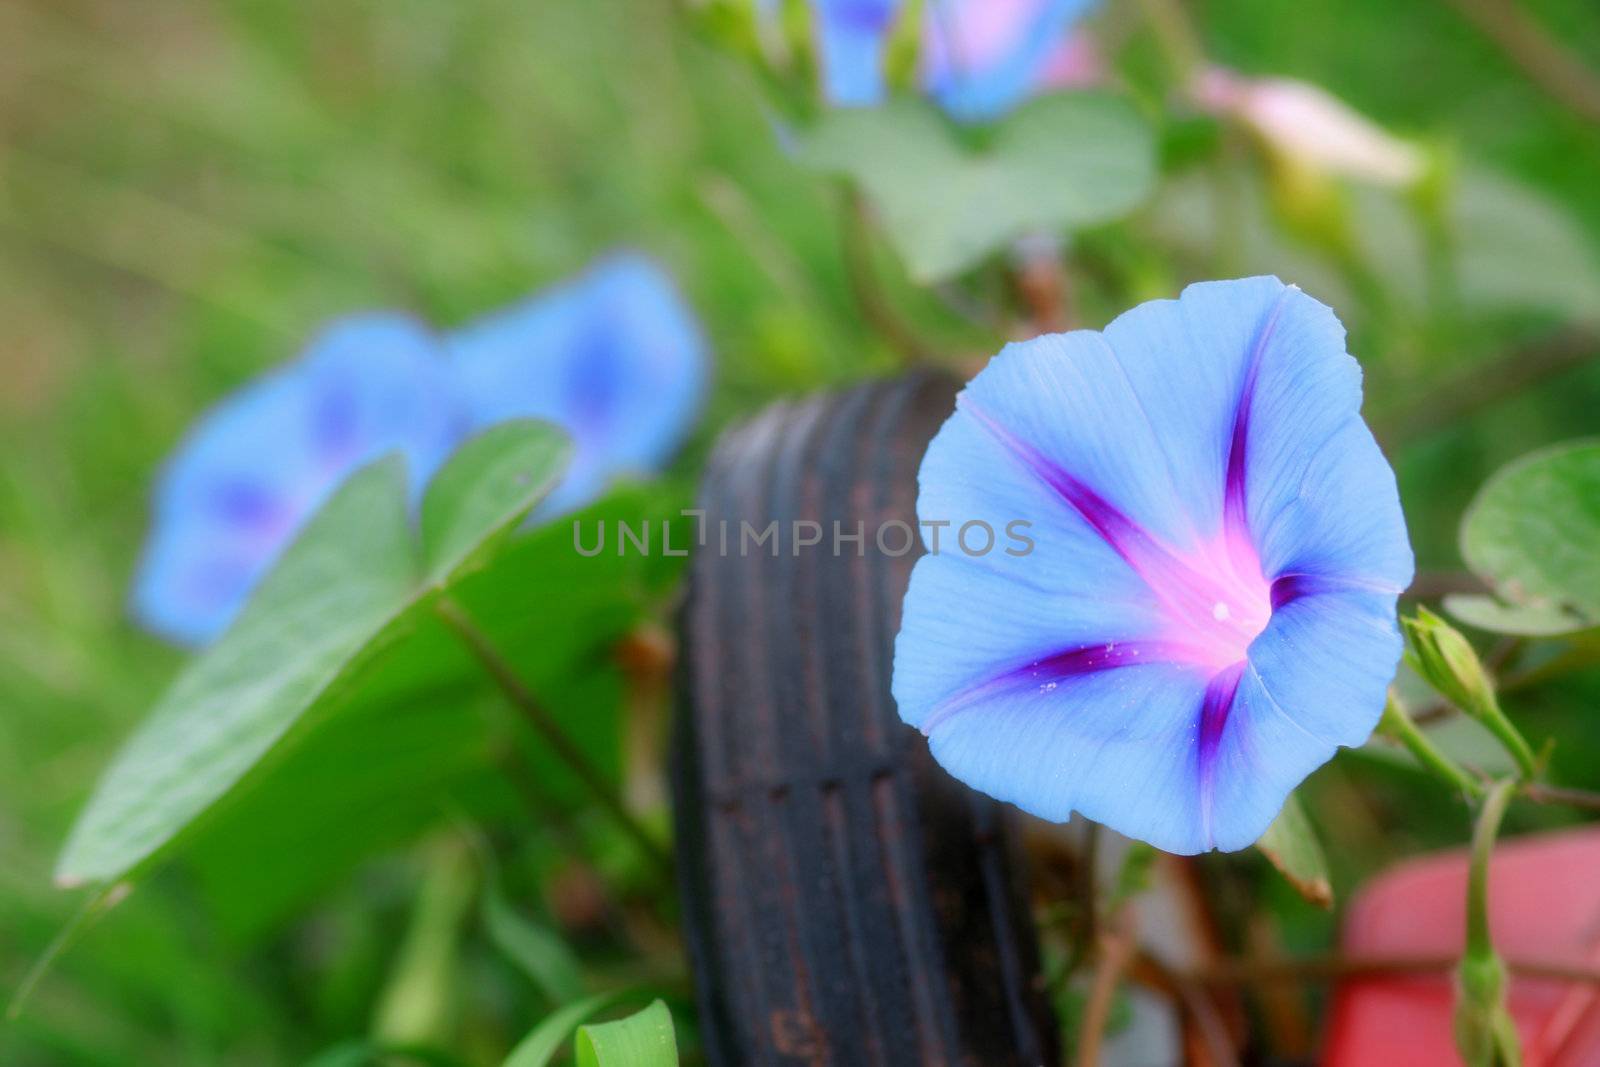 Blue morning glories with a slight soft focus to add to the elegance of the flower.